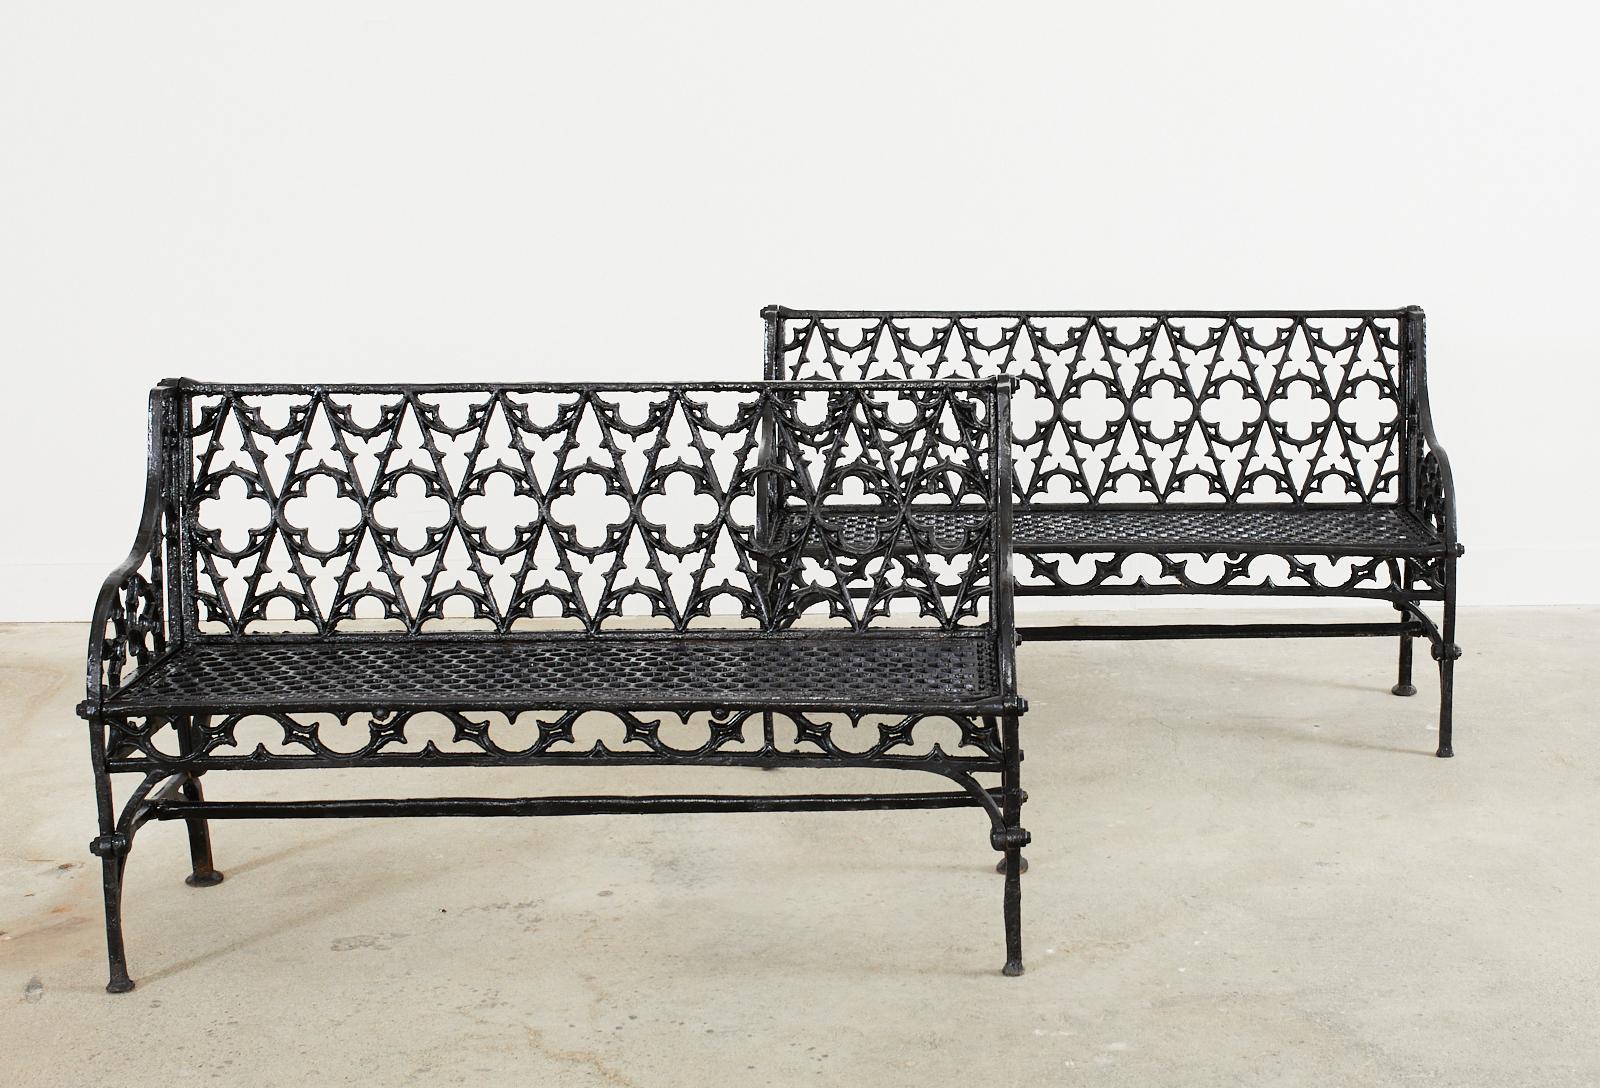 English Coalbrookdale foundry attributed cast iron garden benches. Made in the Gothic Revival English taste featuring Gothic tracery backrest centered by quatrefoil designs. The gracefully curved arms enclosing demilune motif patterns. The seat has